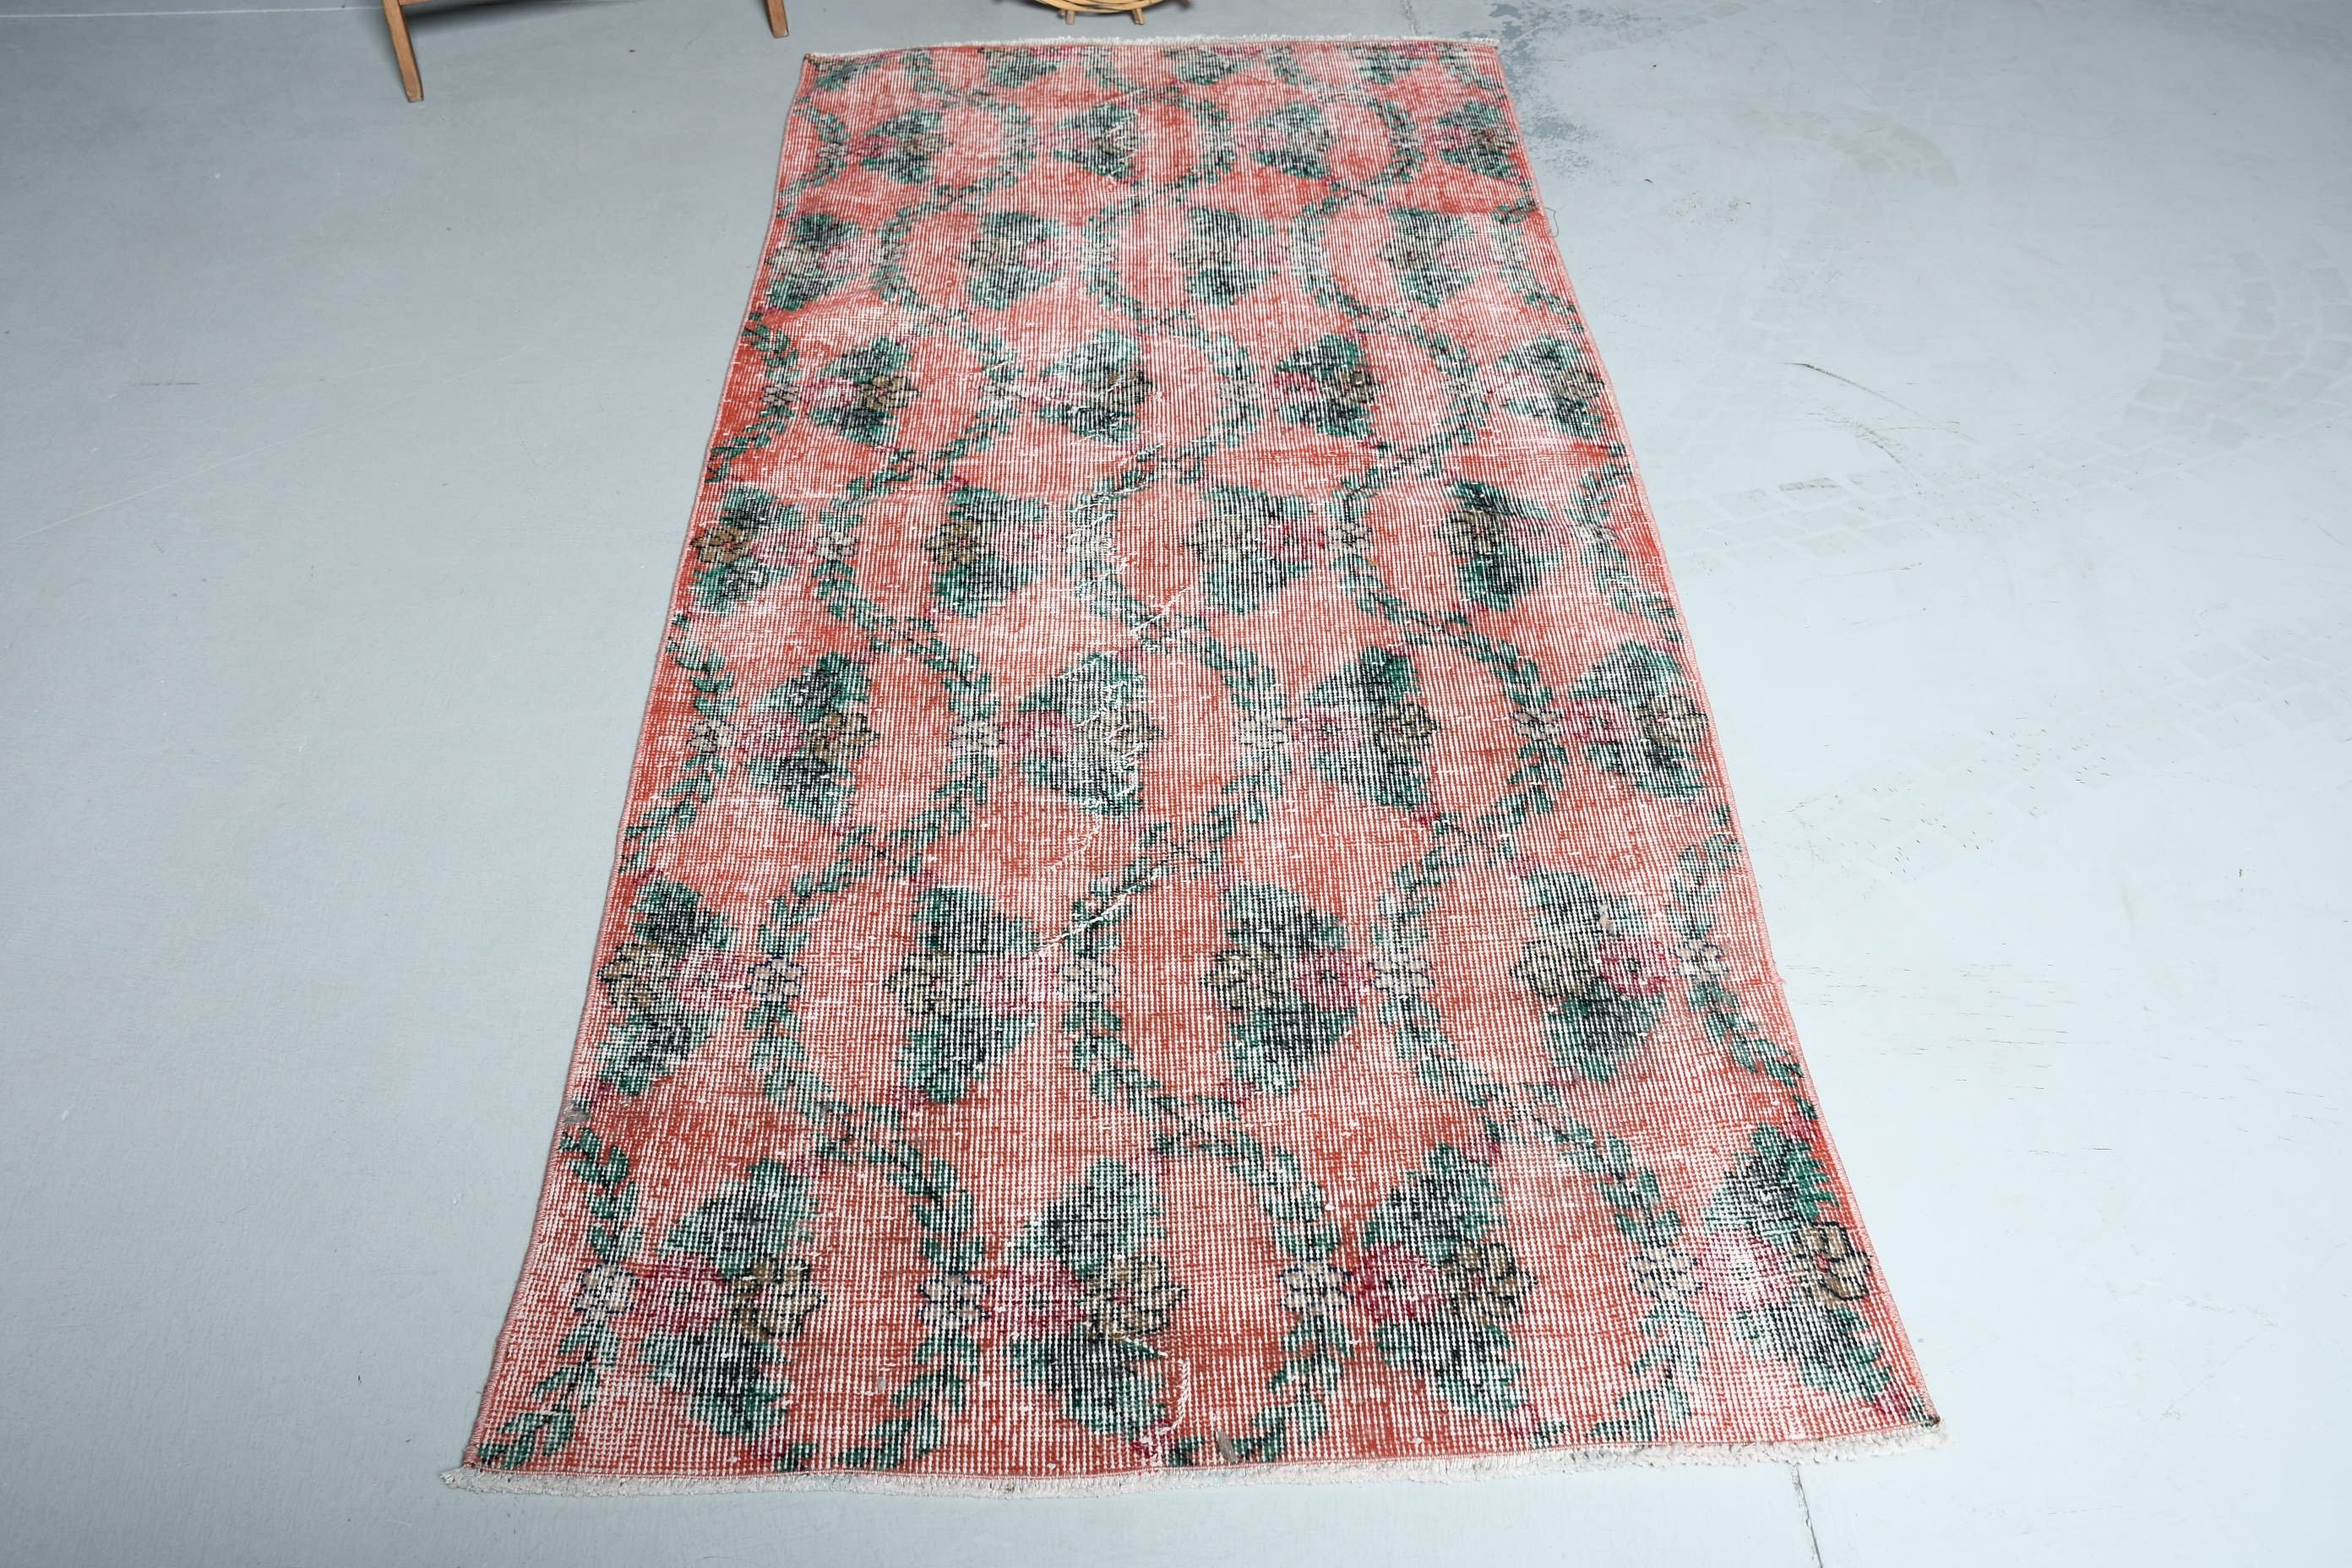 Turkish Rug, Antique Rugs, Pink Anatolian Rugs, Vintage Rug, 3.1x6.7 ft Accent Rug, Nursery Rug, Entry Rug, Kitchen Rugs, Rugs for Nursery